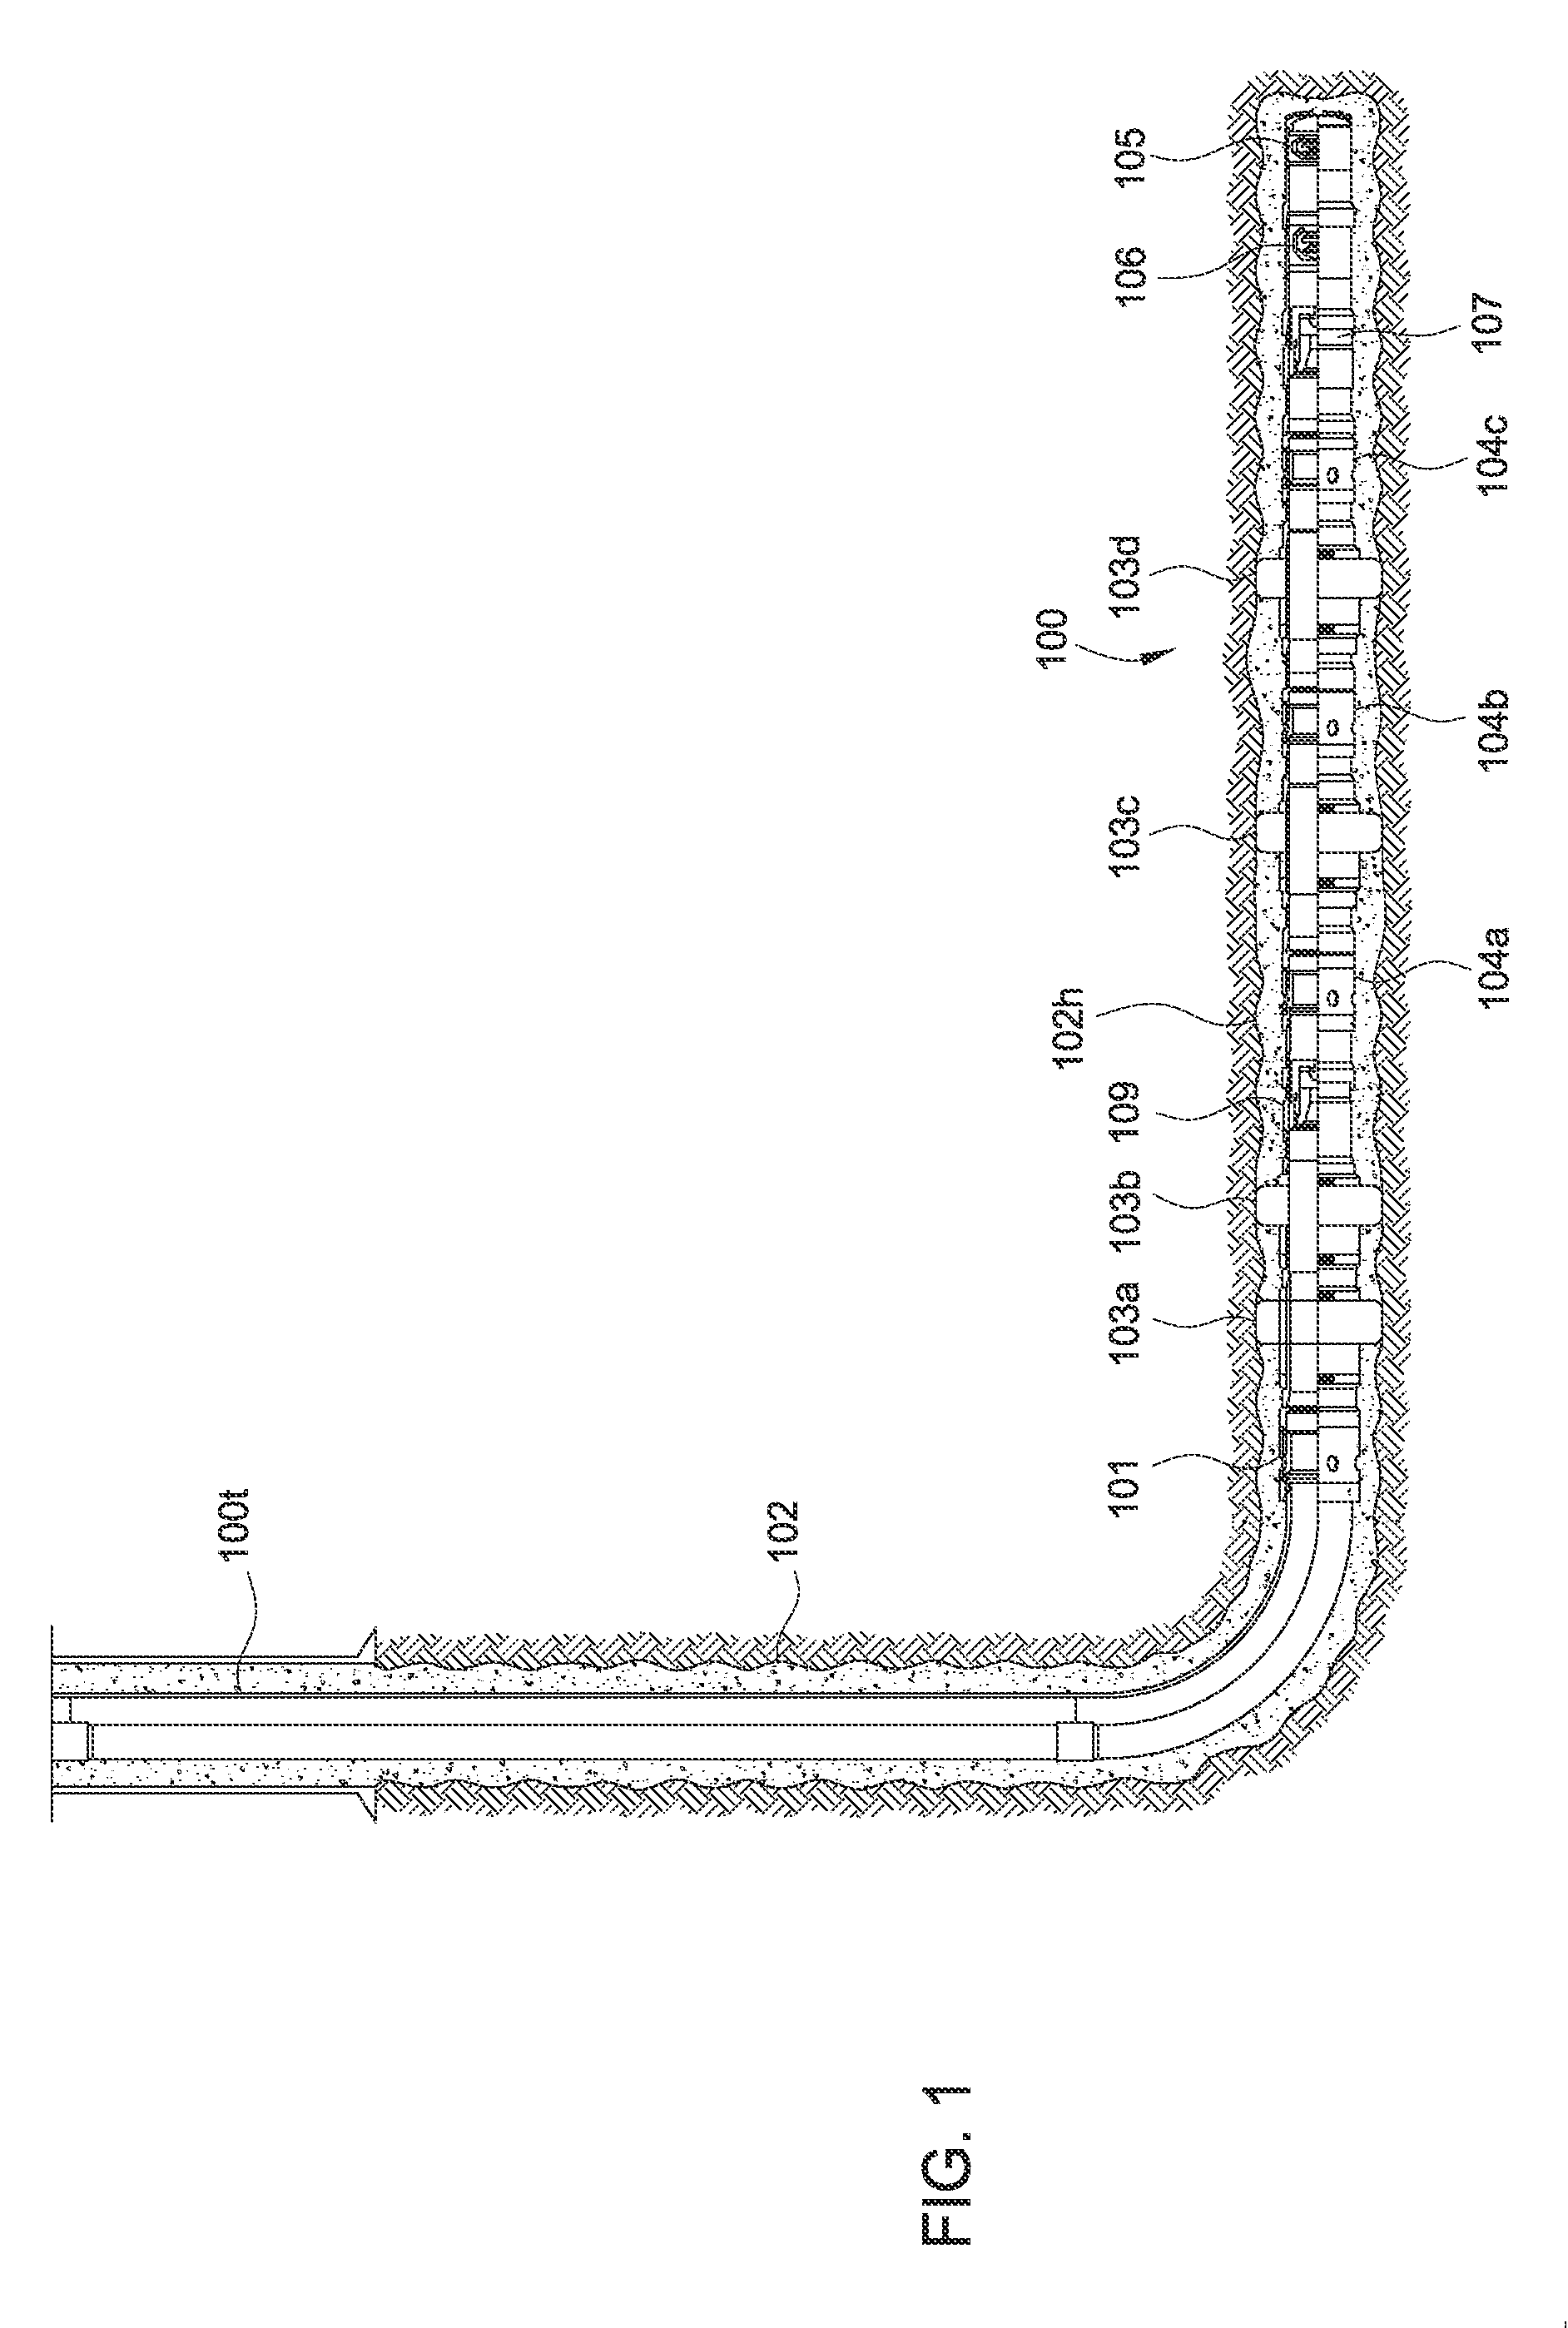 Stage tool with lower tubing isolation